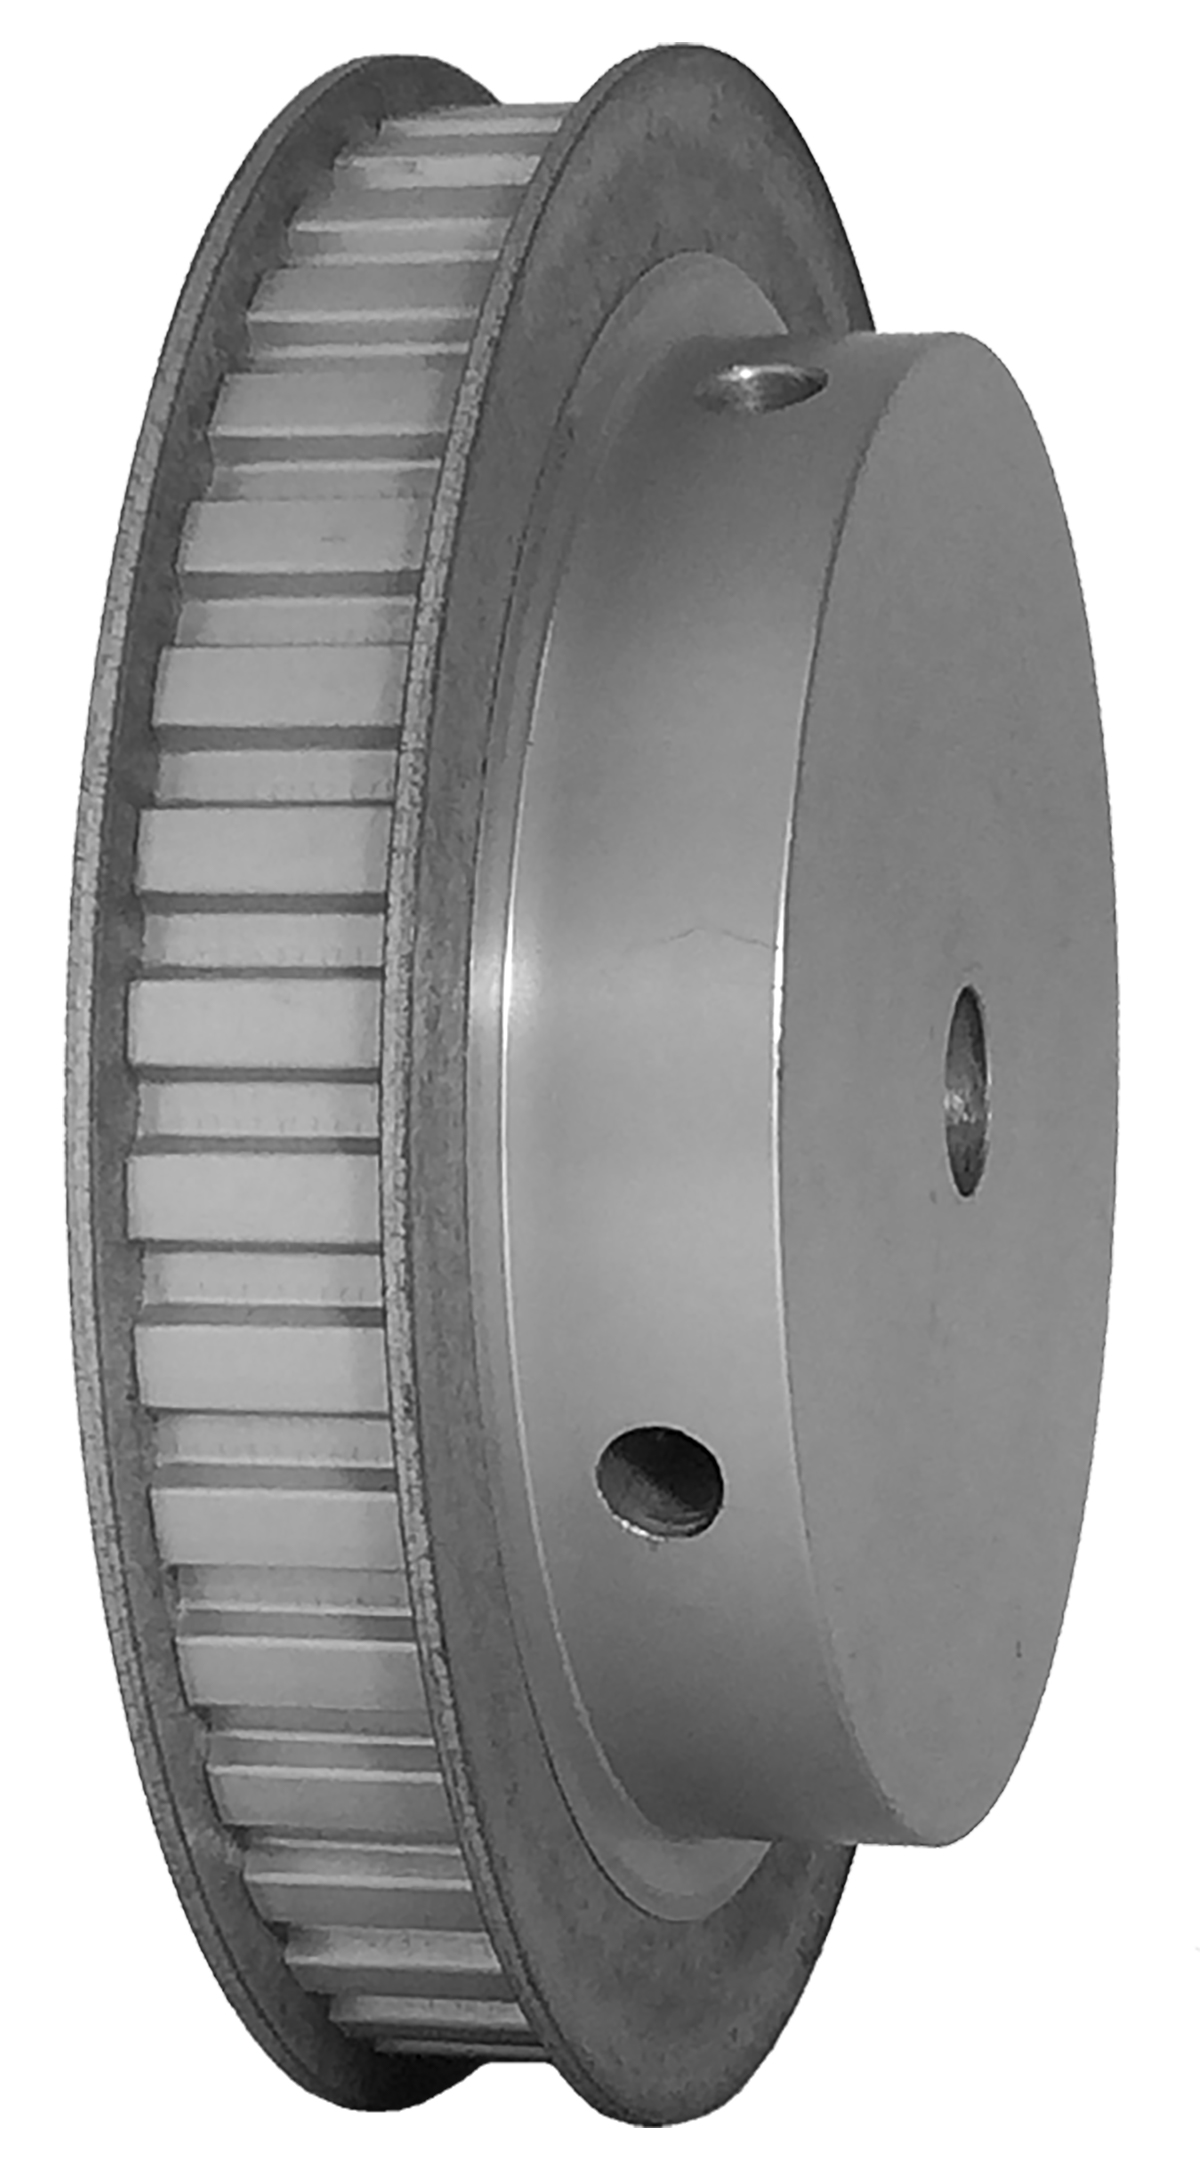 40L050-6FA6 - Aluminum Imperial Pitch Pulleys